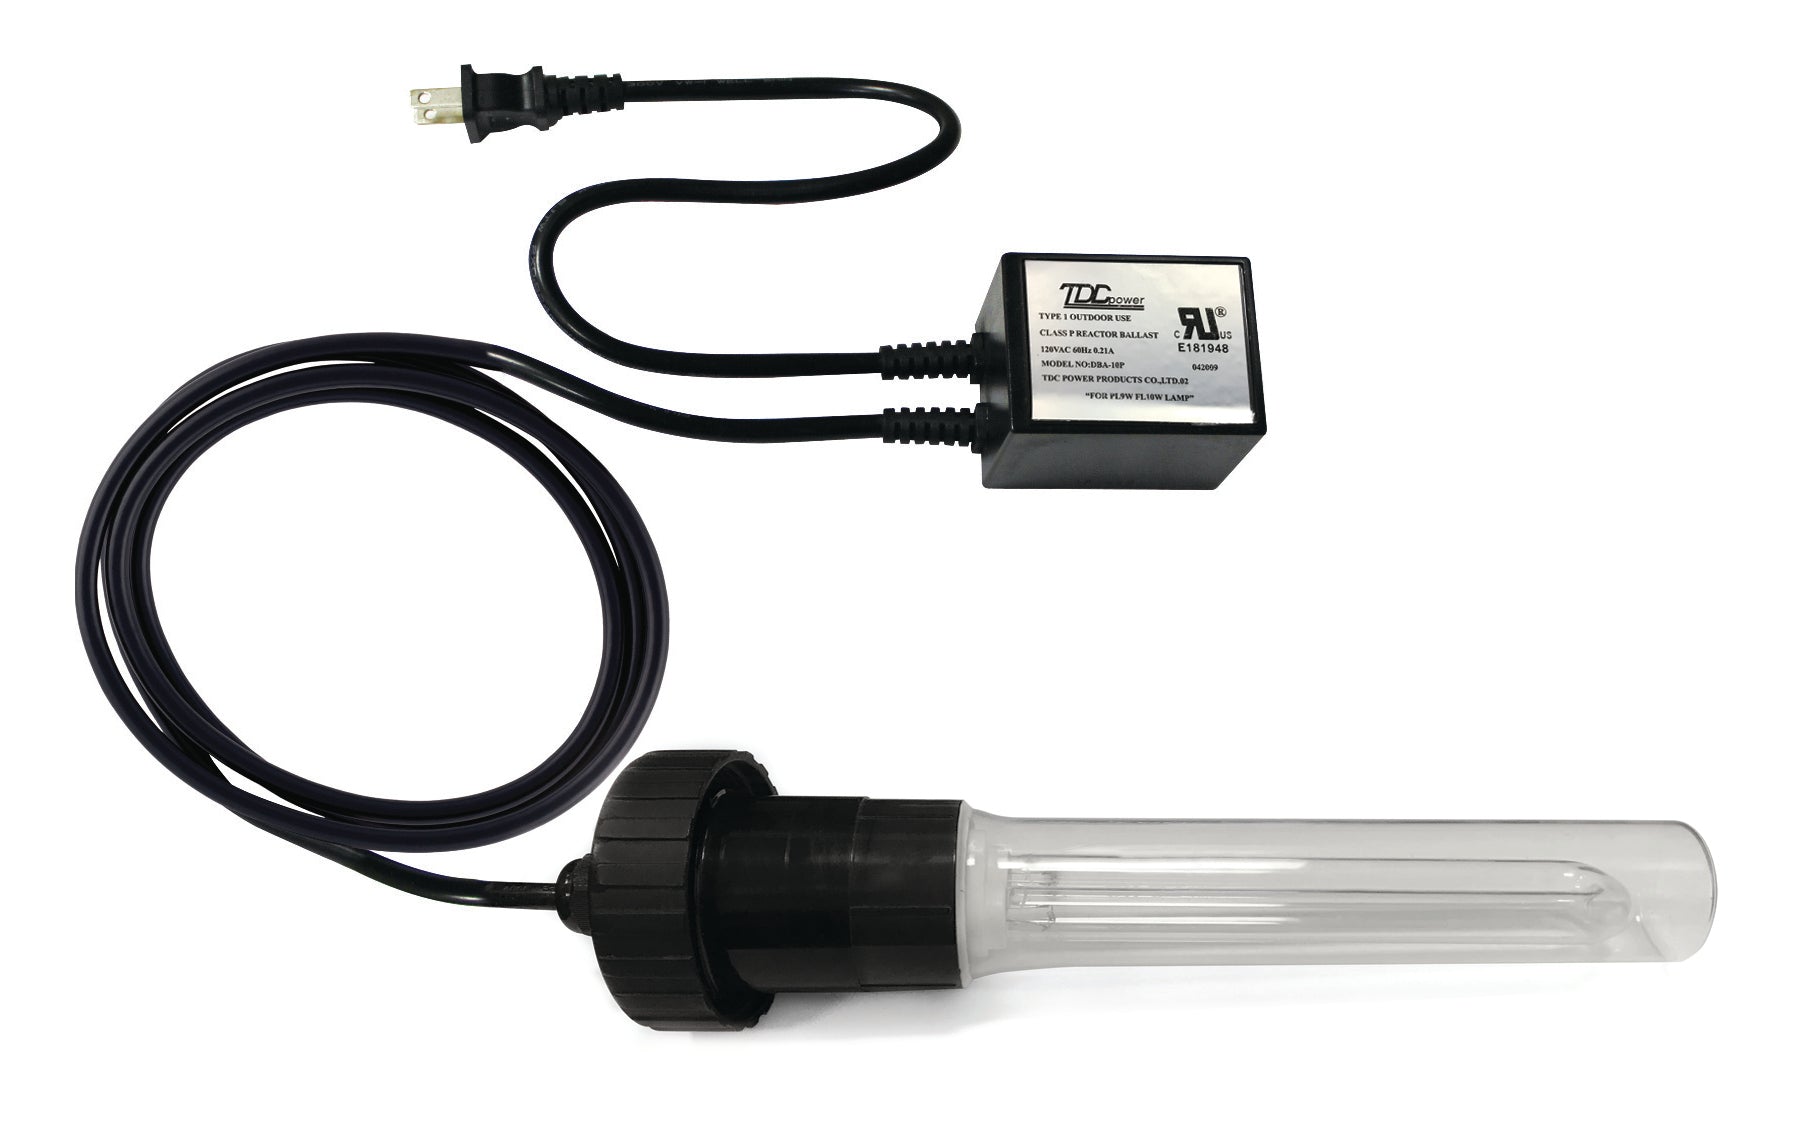 UV Clarifier Kit for Clearguard Pressurized Filters